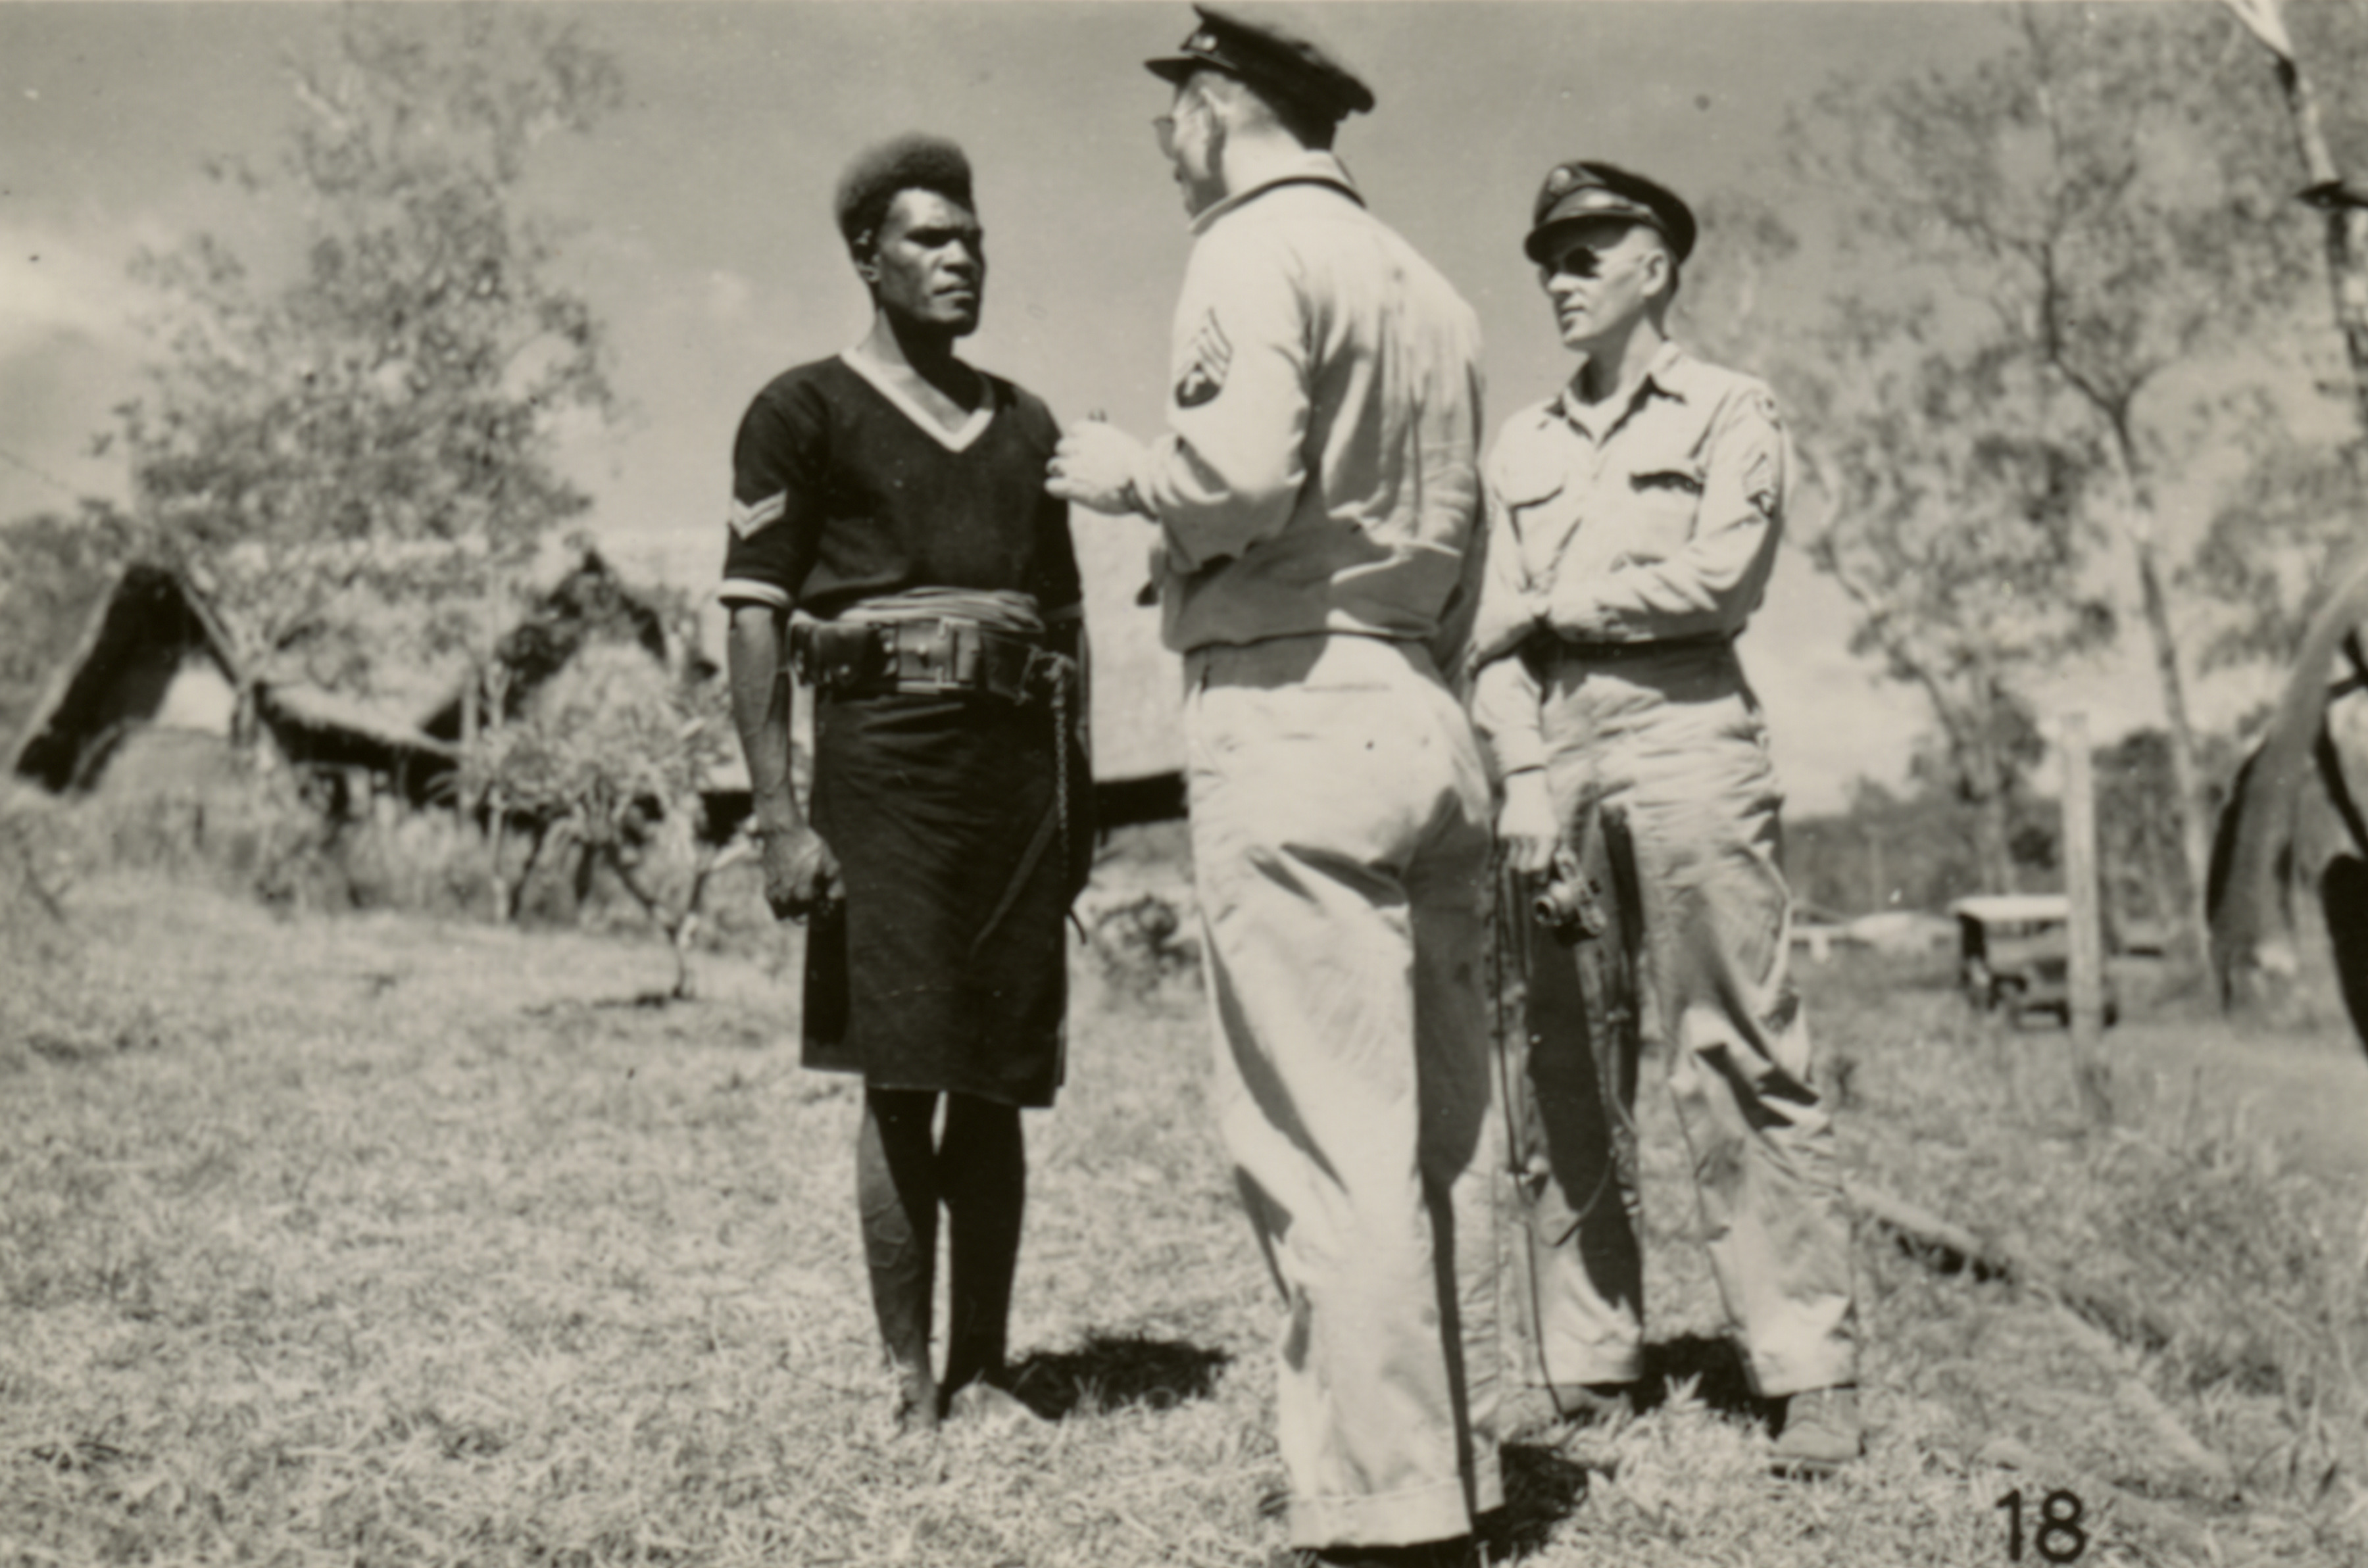 https://www.ww2online.org/image/native-policeman-and-american-servicemen-papua-new-guinea-1944